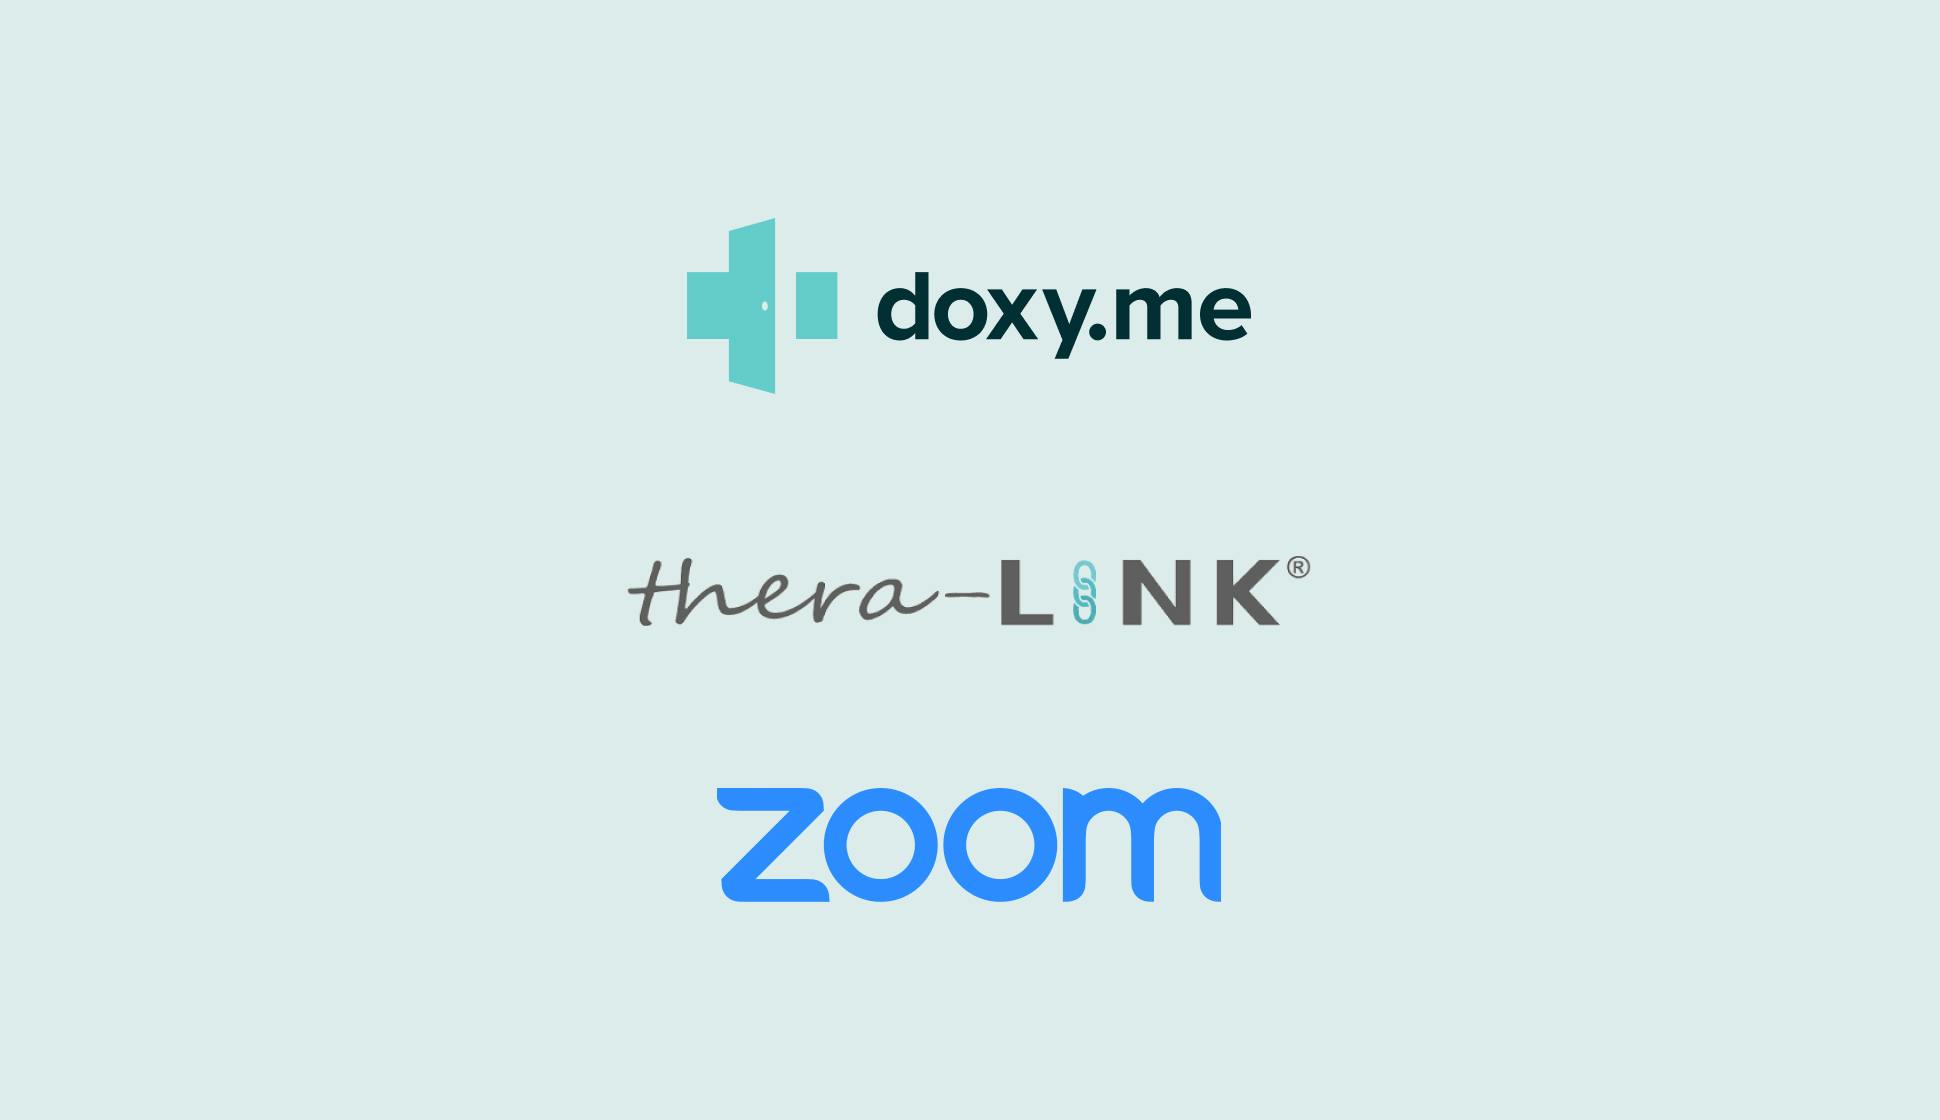 Logos of doxy.me and other telemedicine solutions